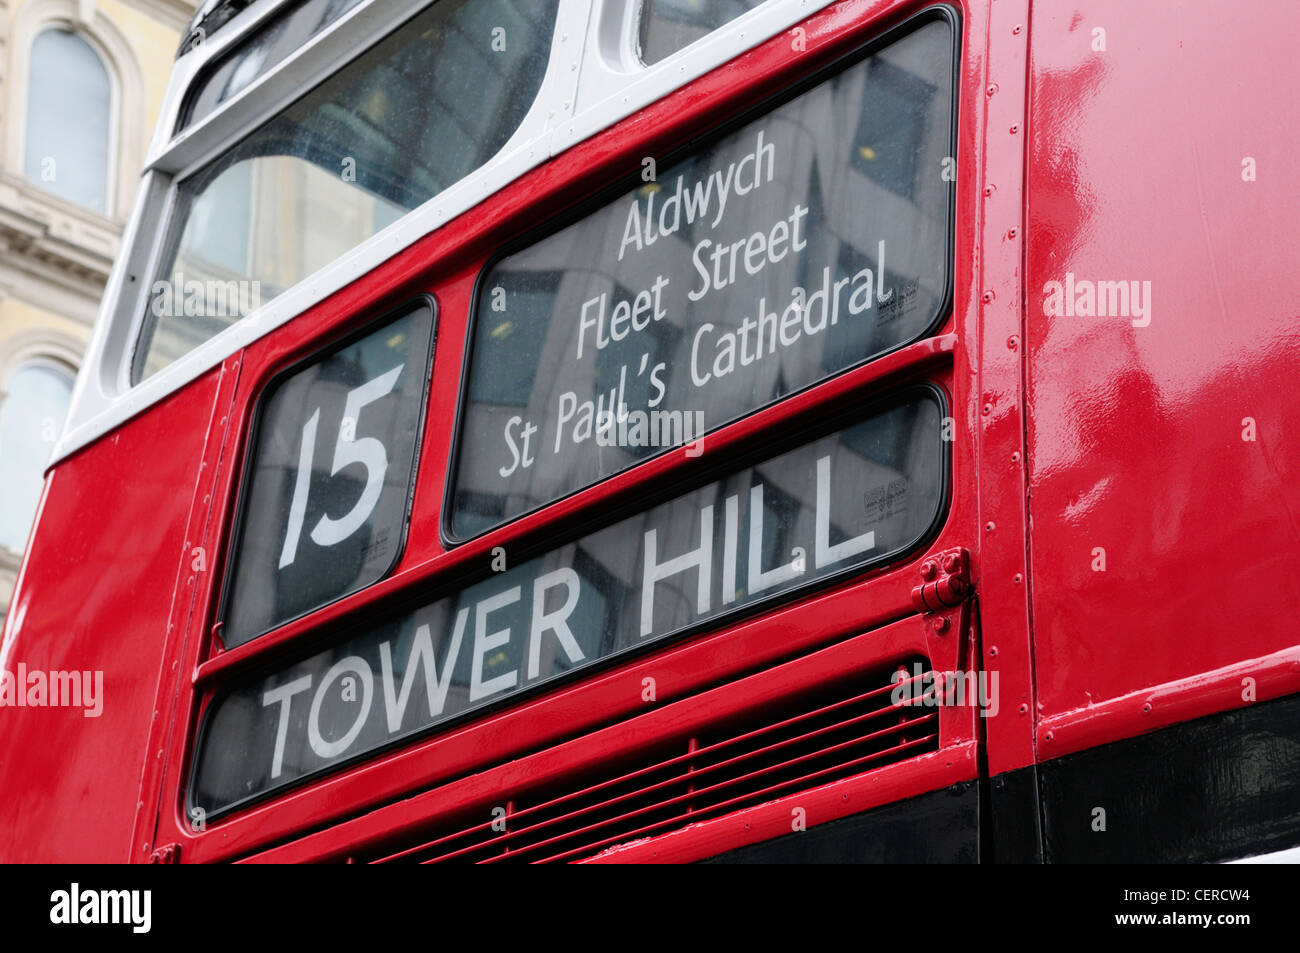 A Routemaster London bus on heritage route 15 between Trafalgar Square and Tower Hill. Stock Photo